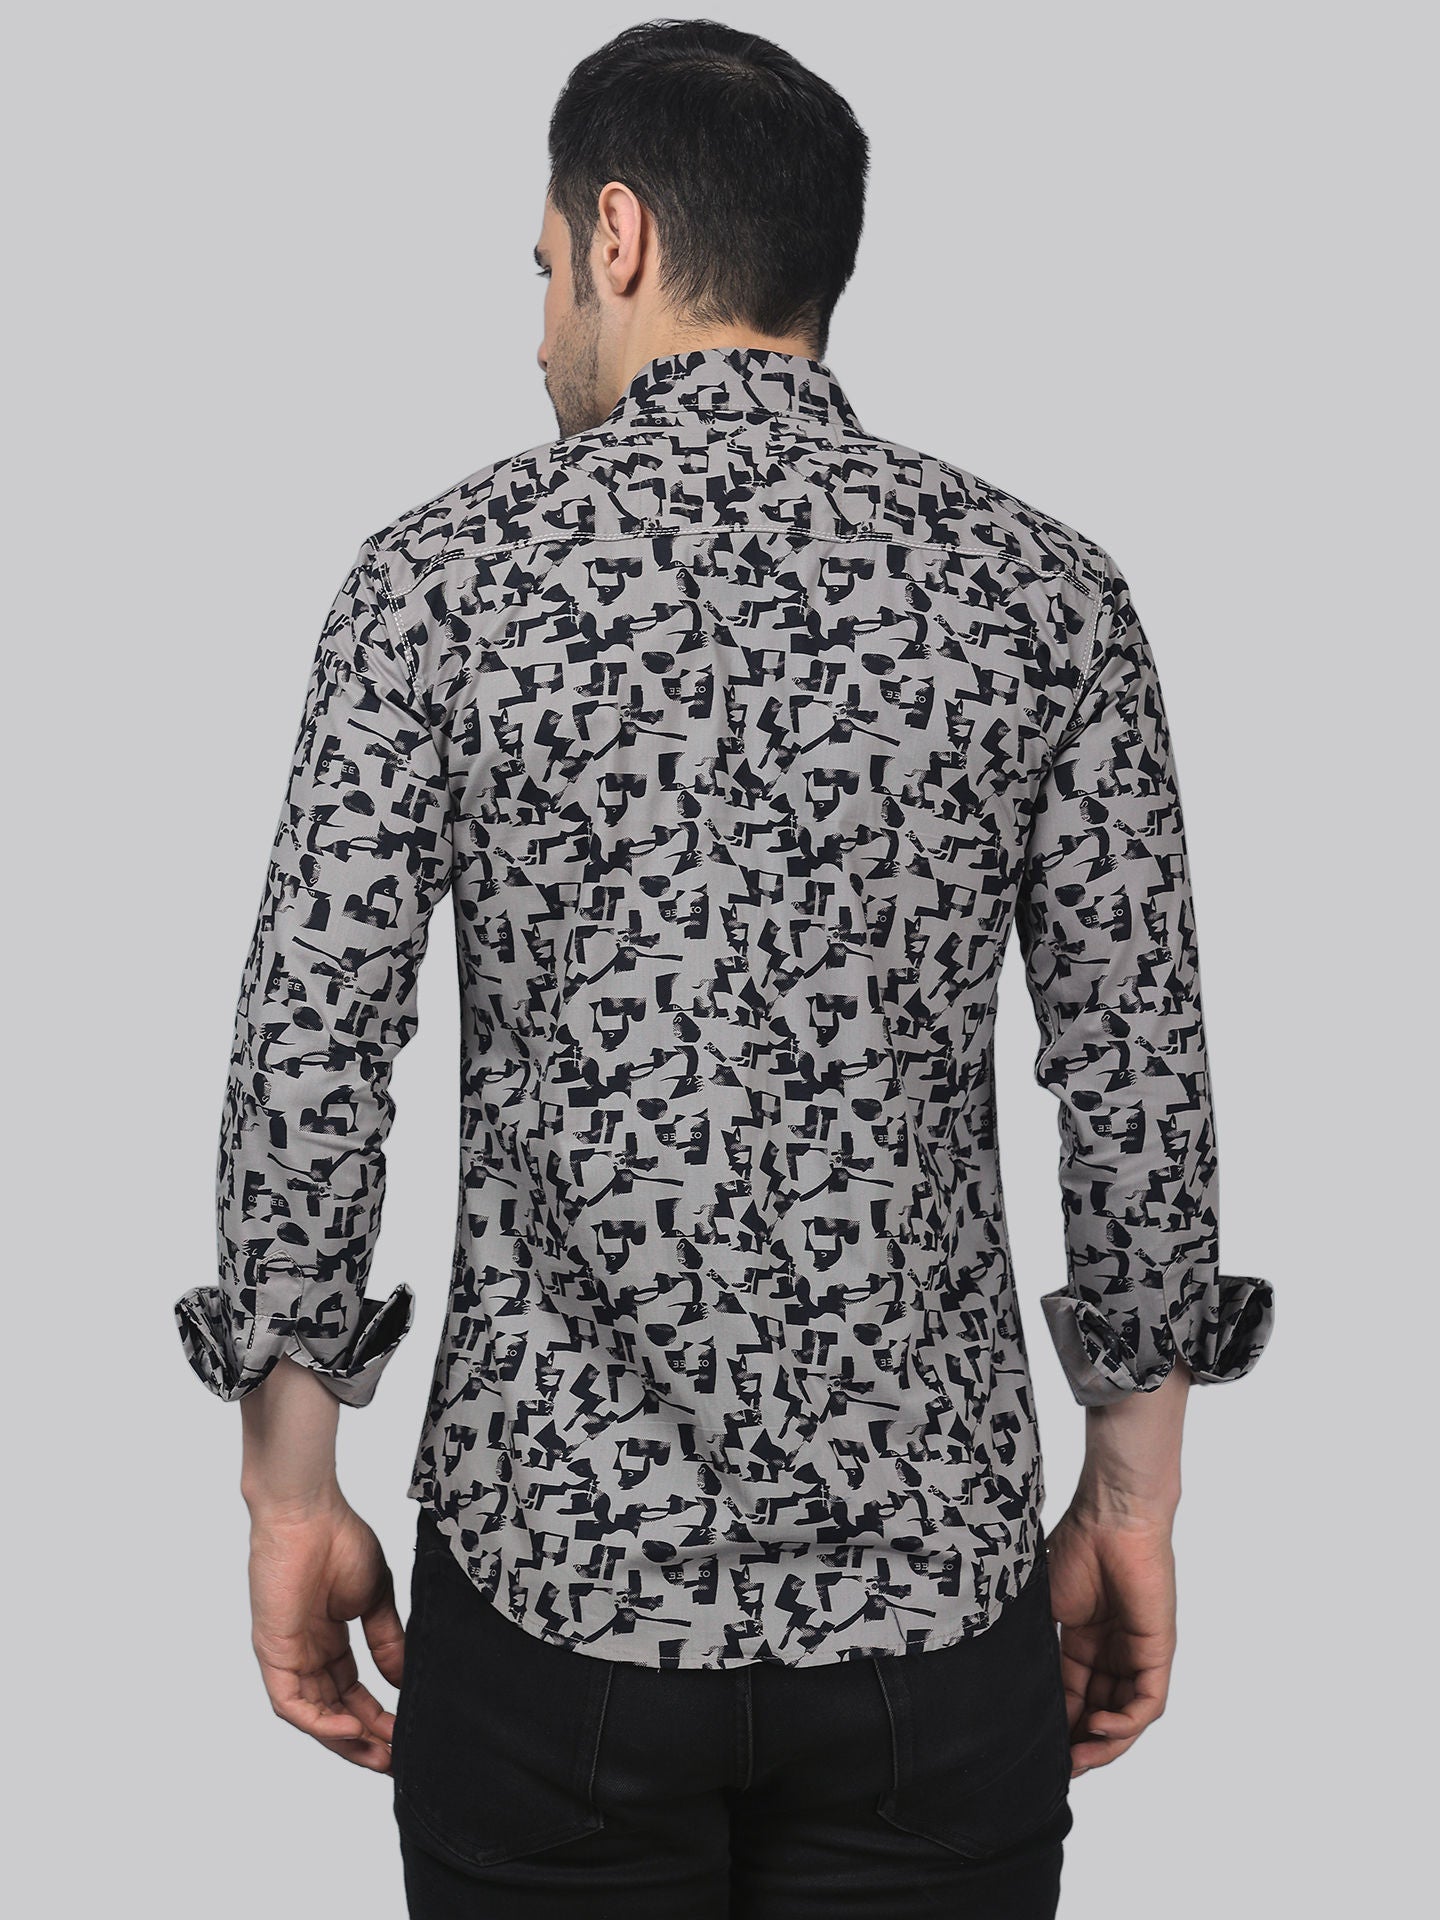 TryBuy Unique Elegant Men's Cotton Casual Printed Full Sleeves Shirt - TryBuy® USA🇺🇸